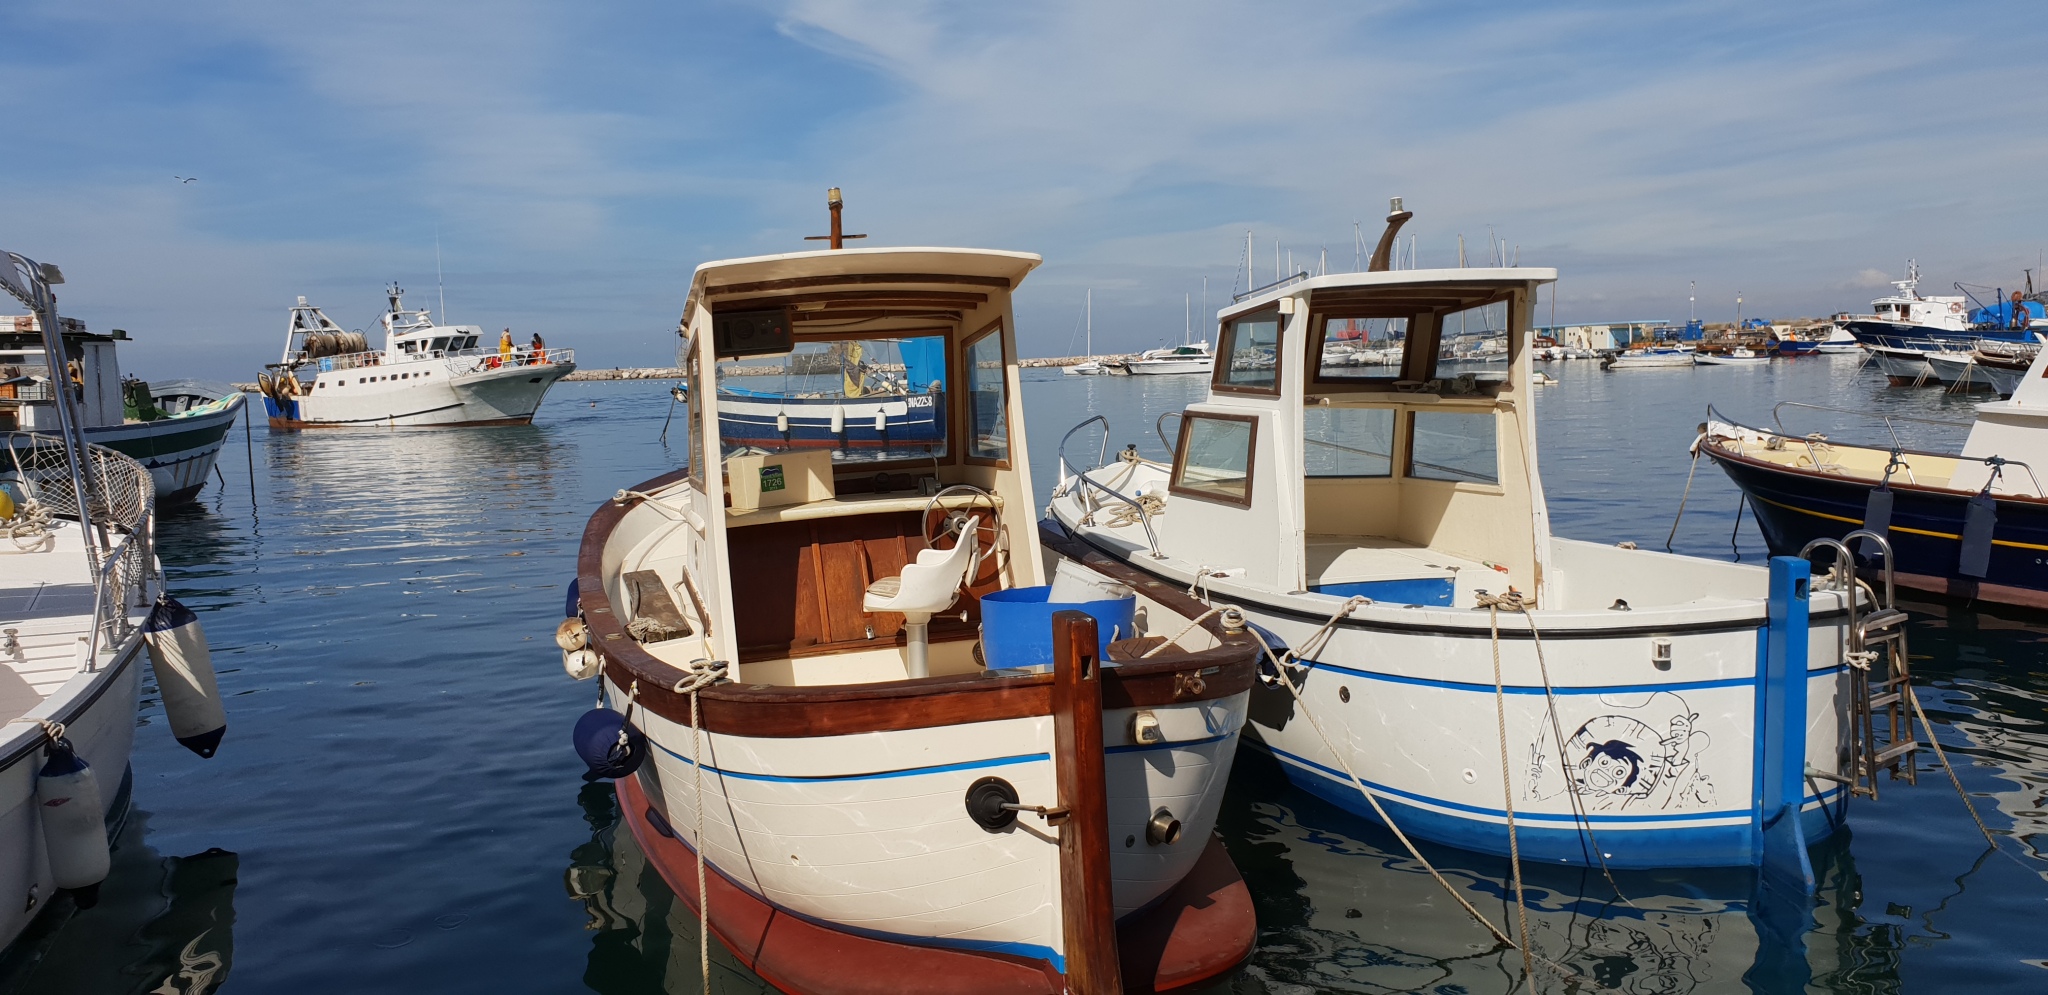 Procida and ‘Il Postino’ – The Educated Traveller